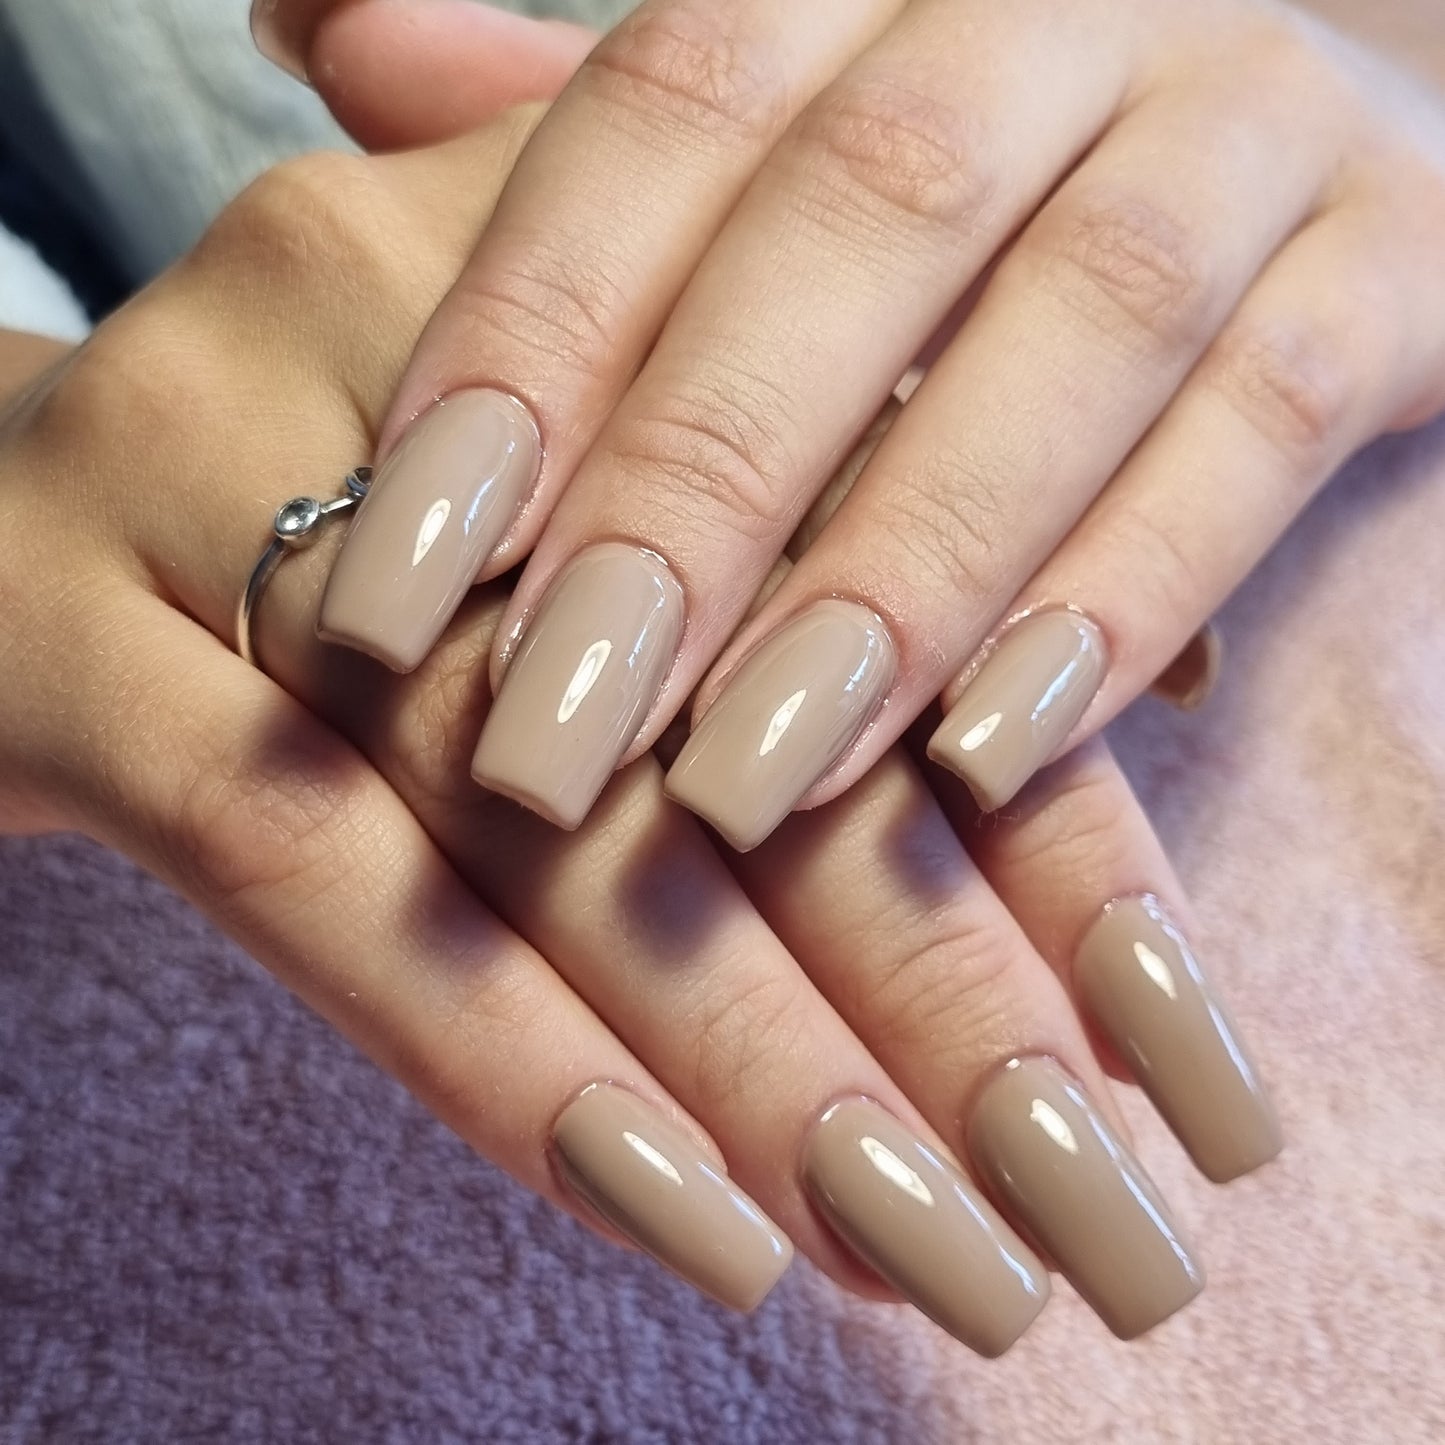 ACRYLIC NAIL EXTENSIONS COURSE